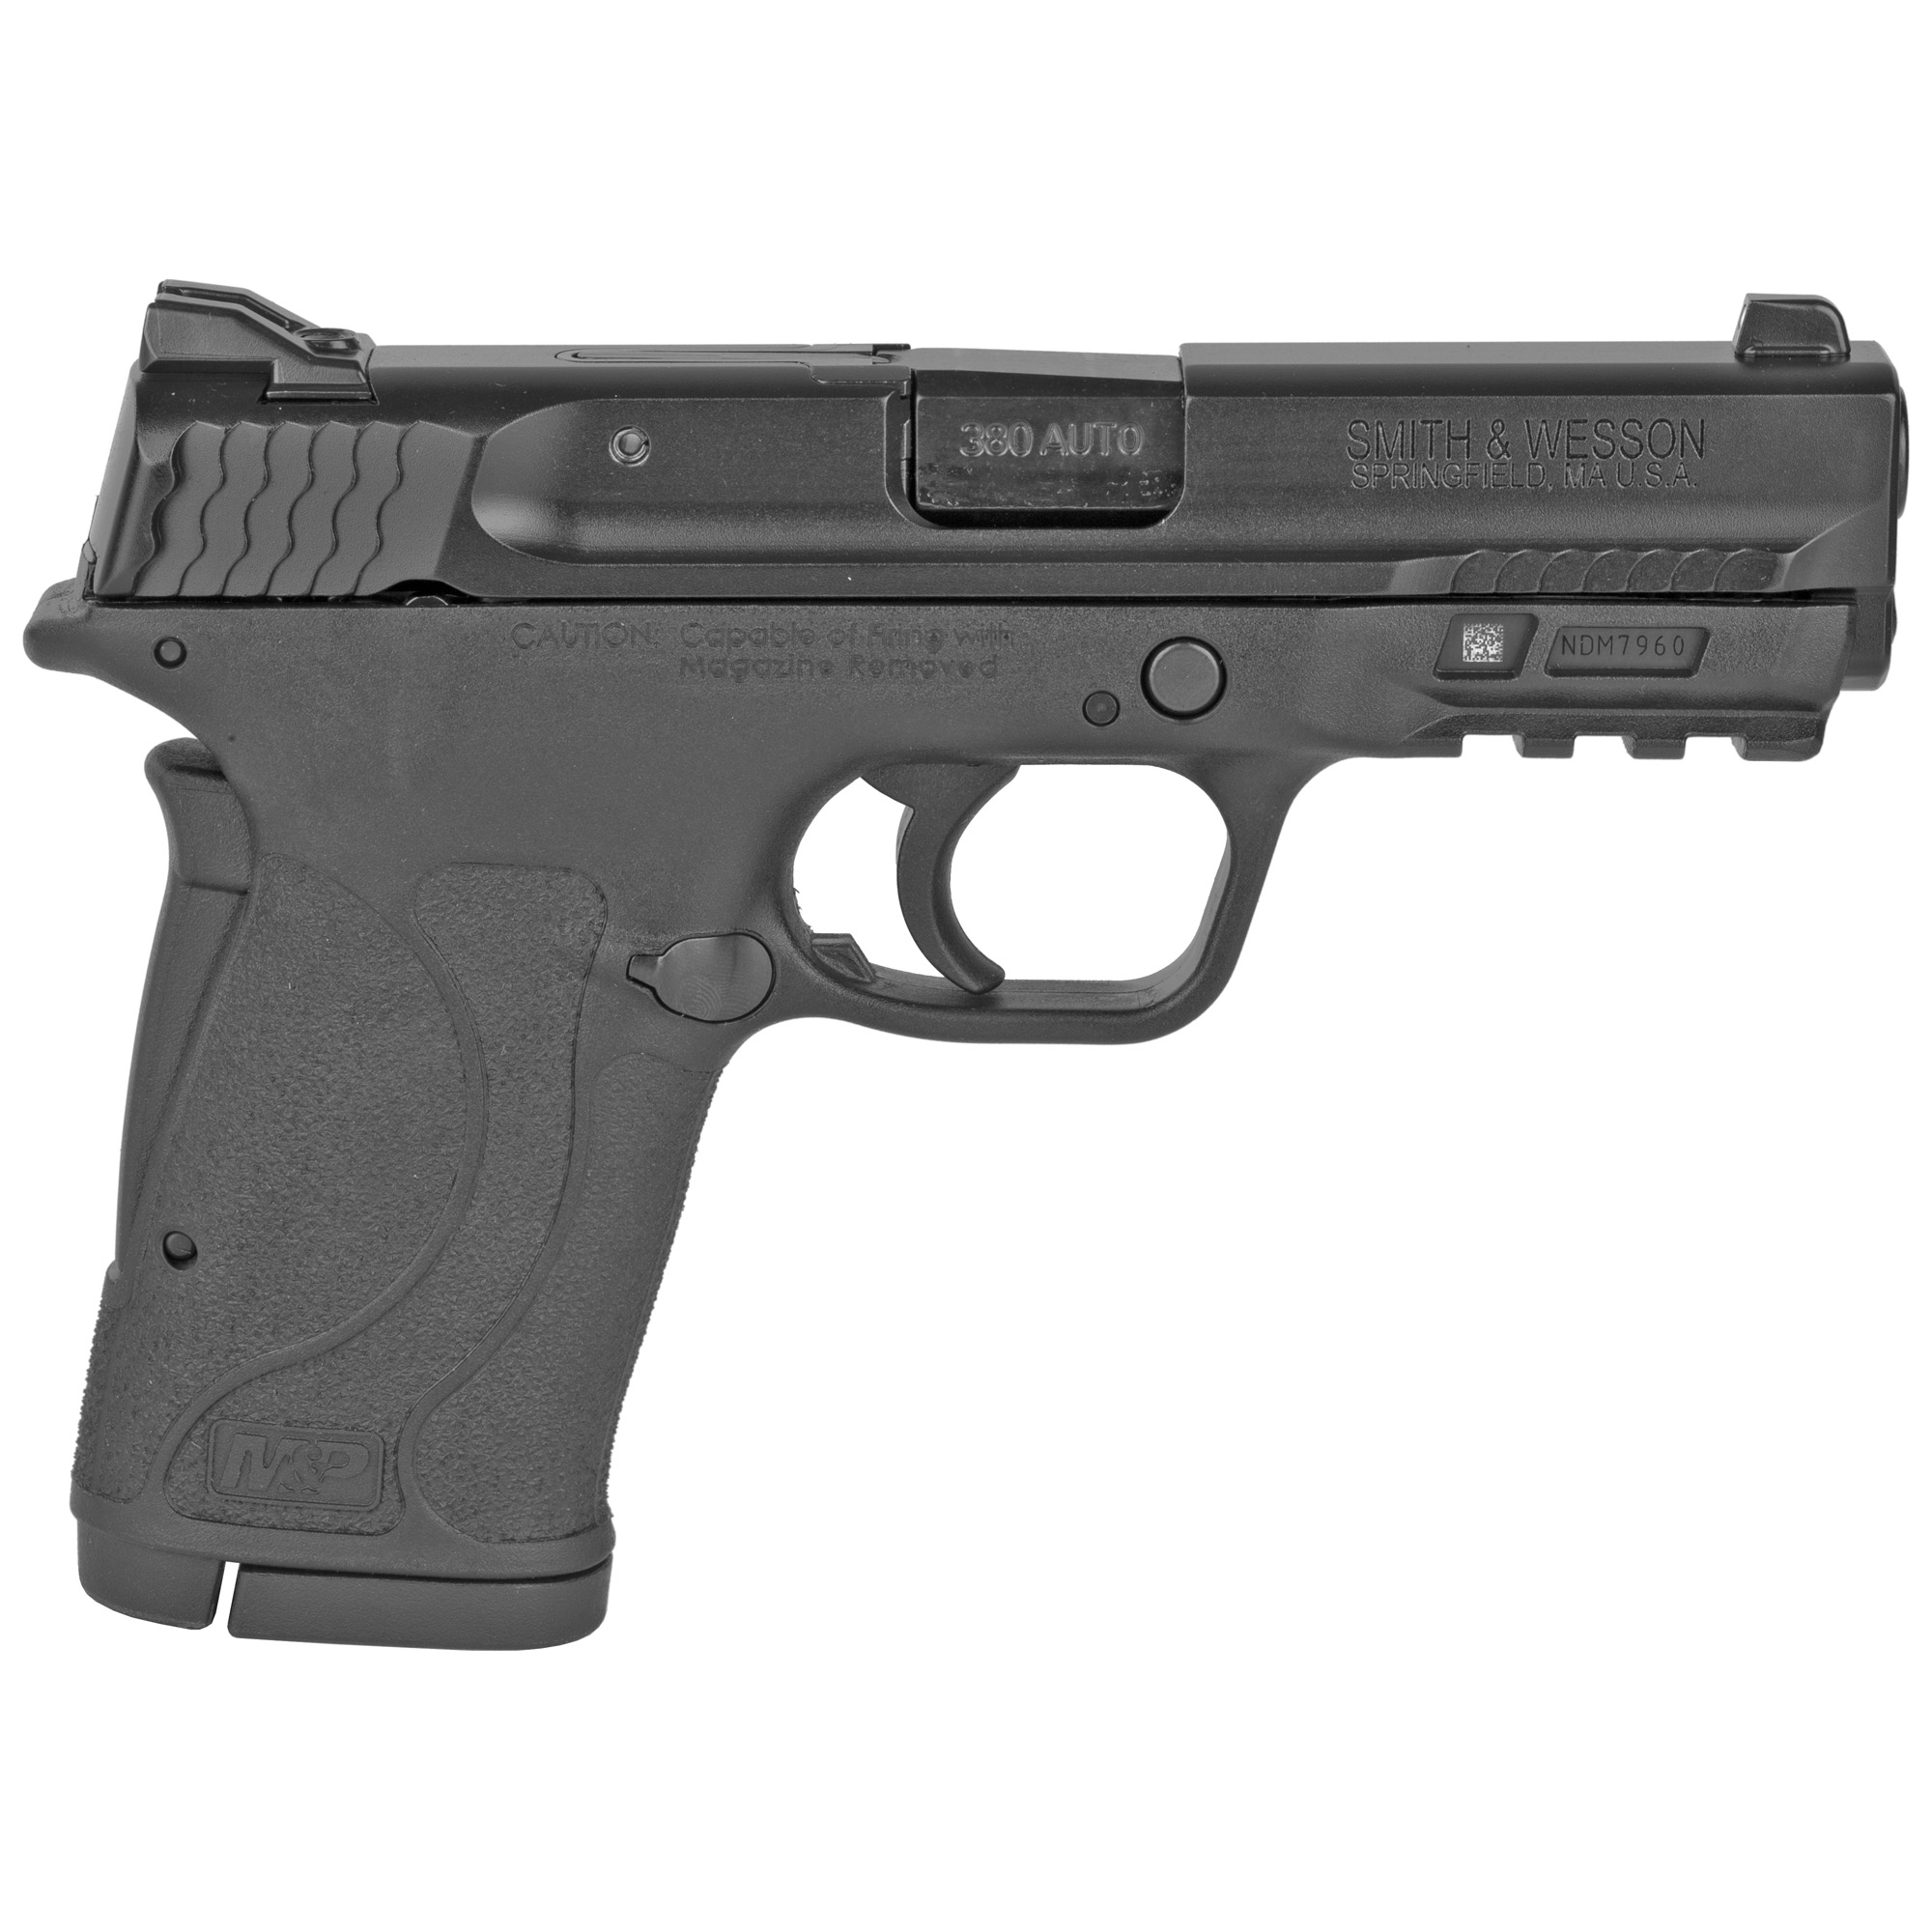 Smith & Wesson, M&P380 Shield EZ M2.0, Internal Hammer Fired, Semi-automatic, Polymer Frame Pistol, Micro-Compact, 380ACP, 3.675" Barrel, Armornite Finish, Black, 3 Dot Sights, 8 Rounds, 2 Magazines